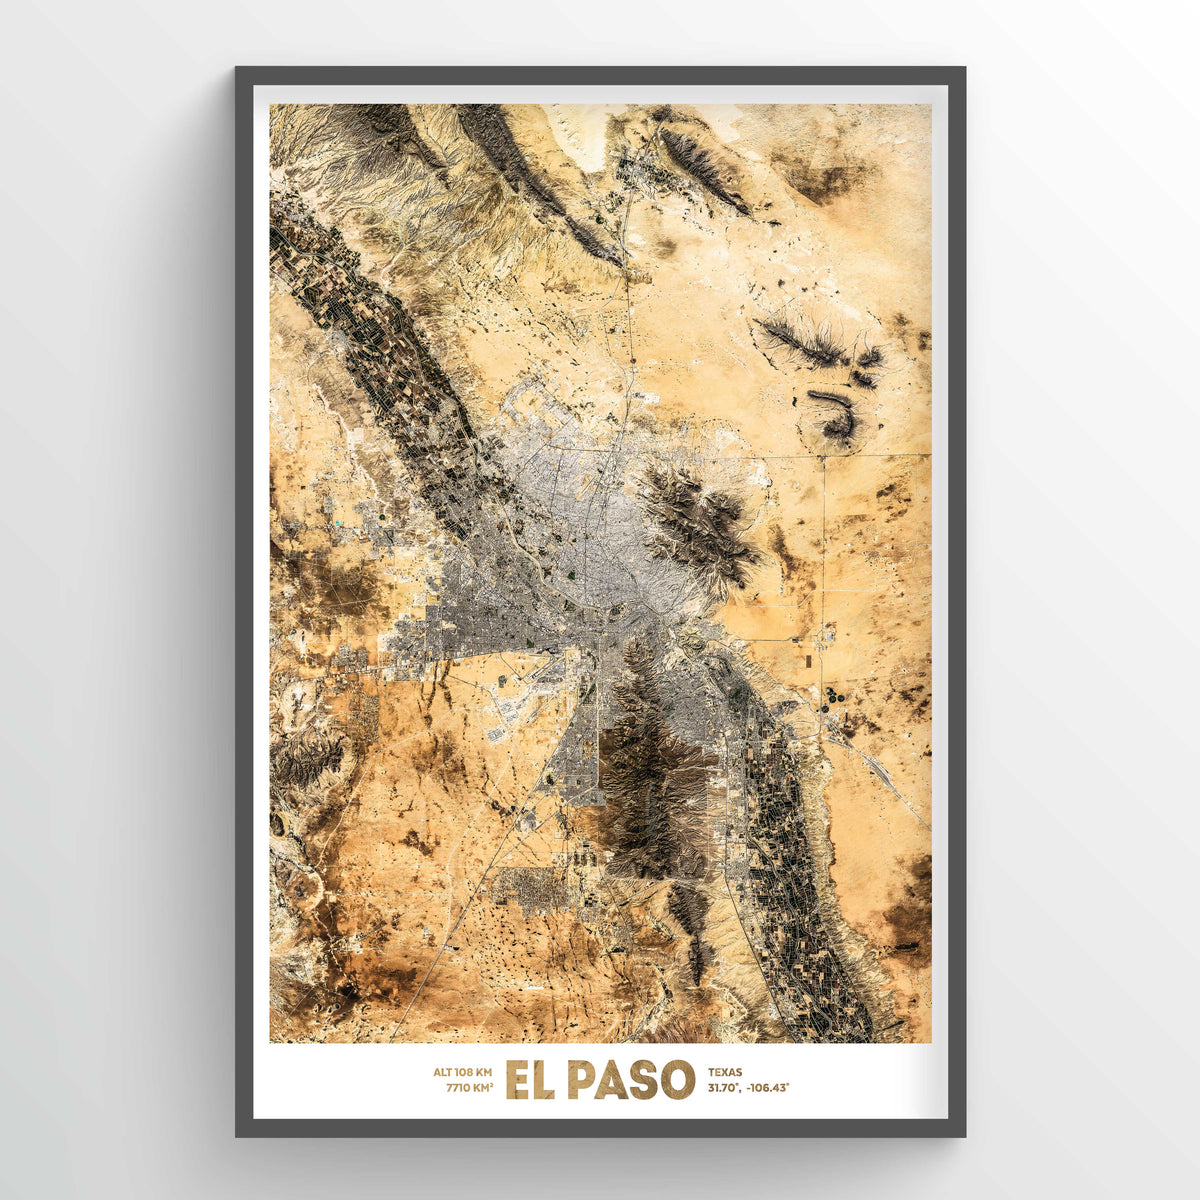 El Paso Earth Photography - Art Print - Point Two Design